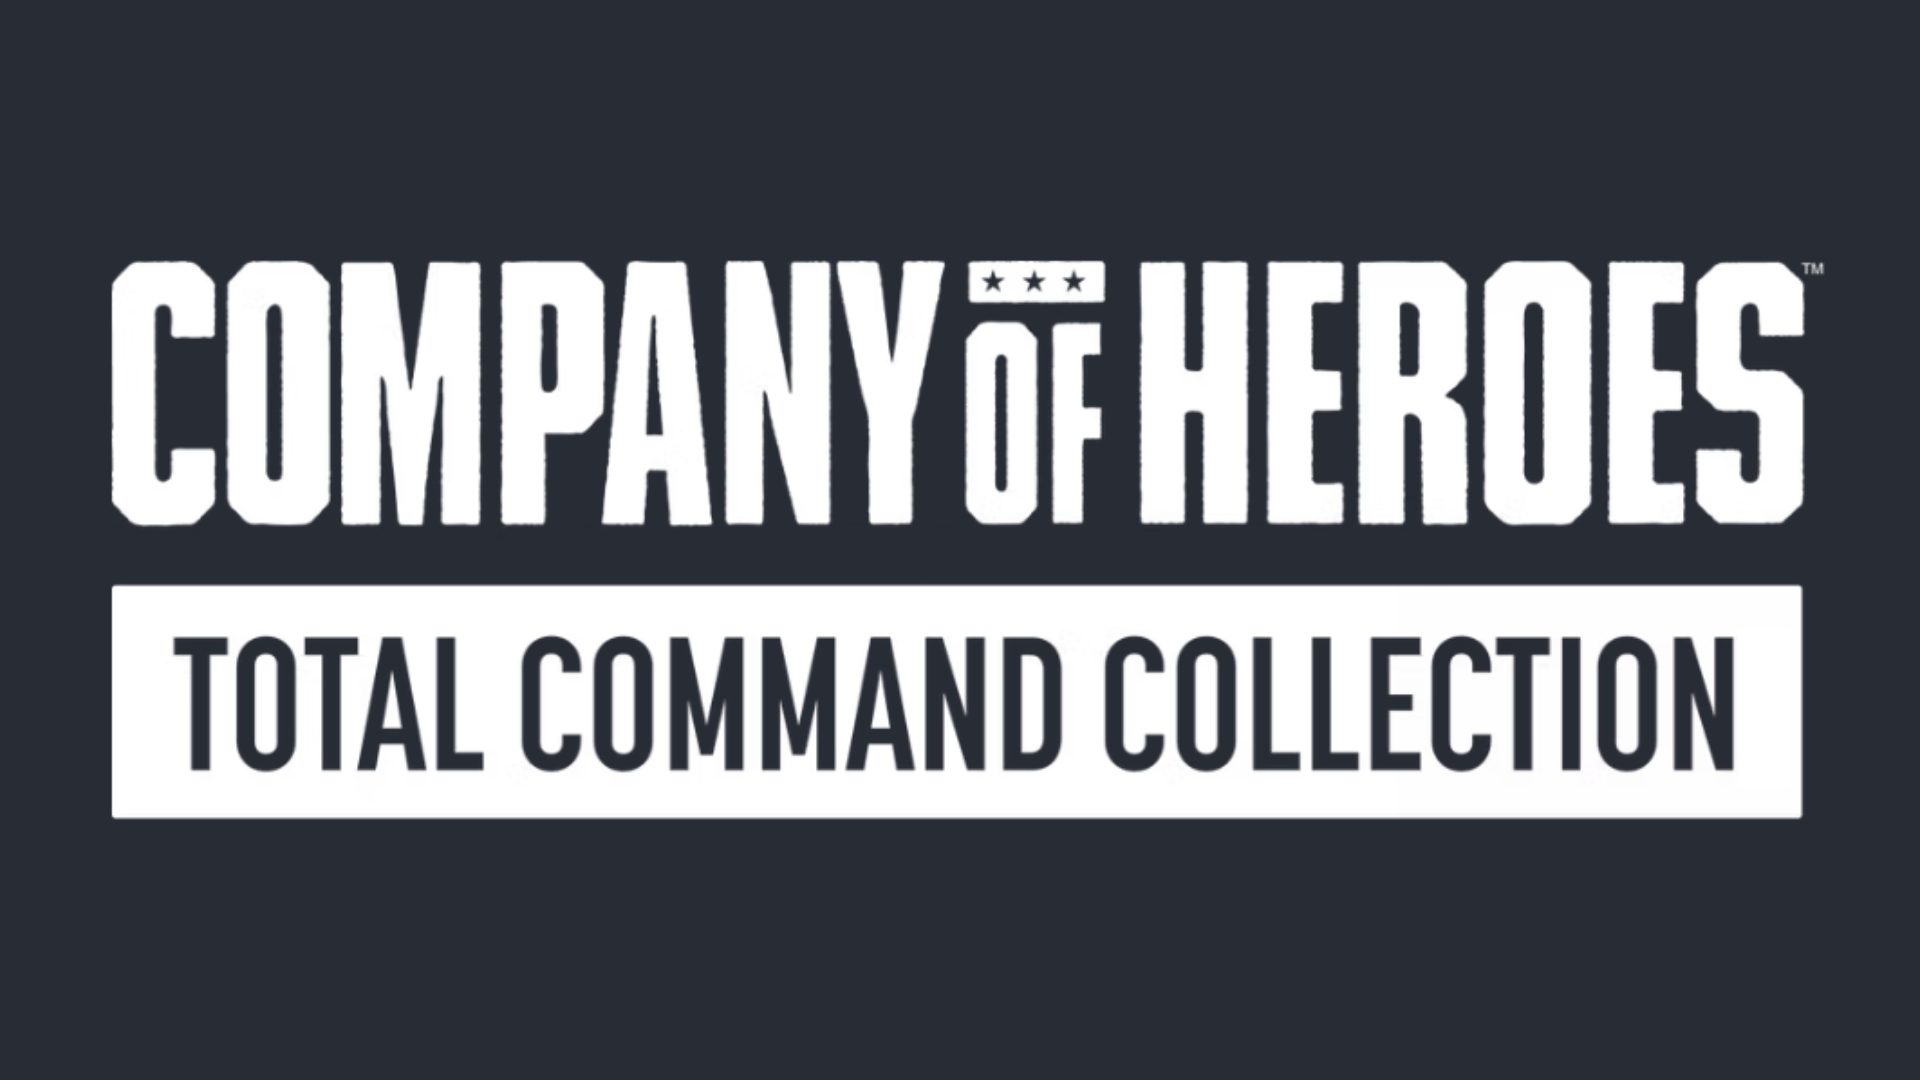 Company of Heroes: Total Command Collection bundle logo.